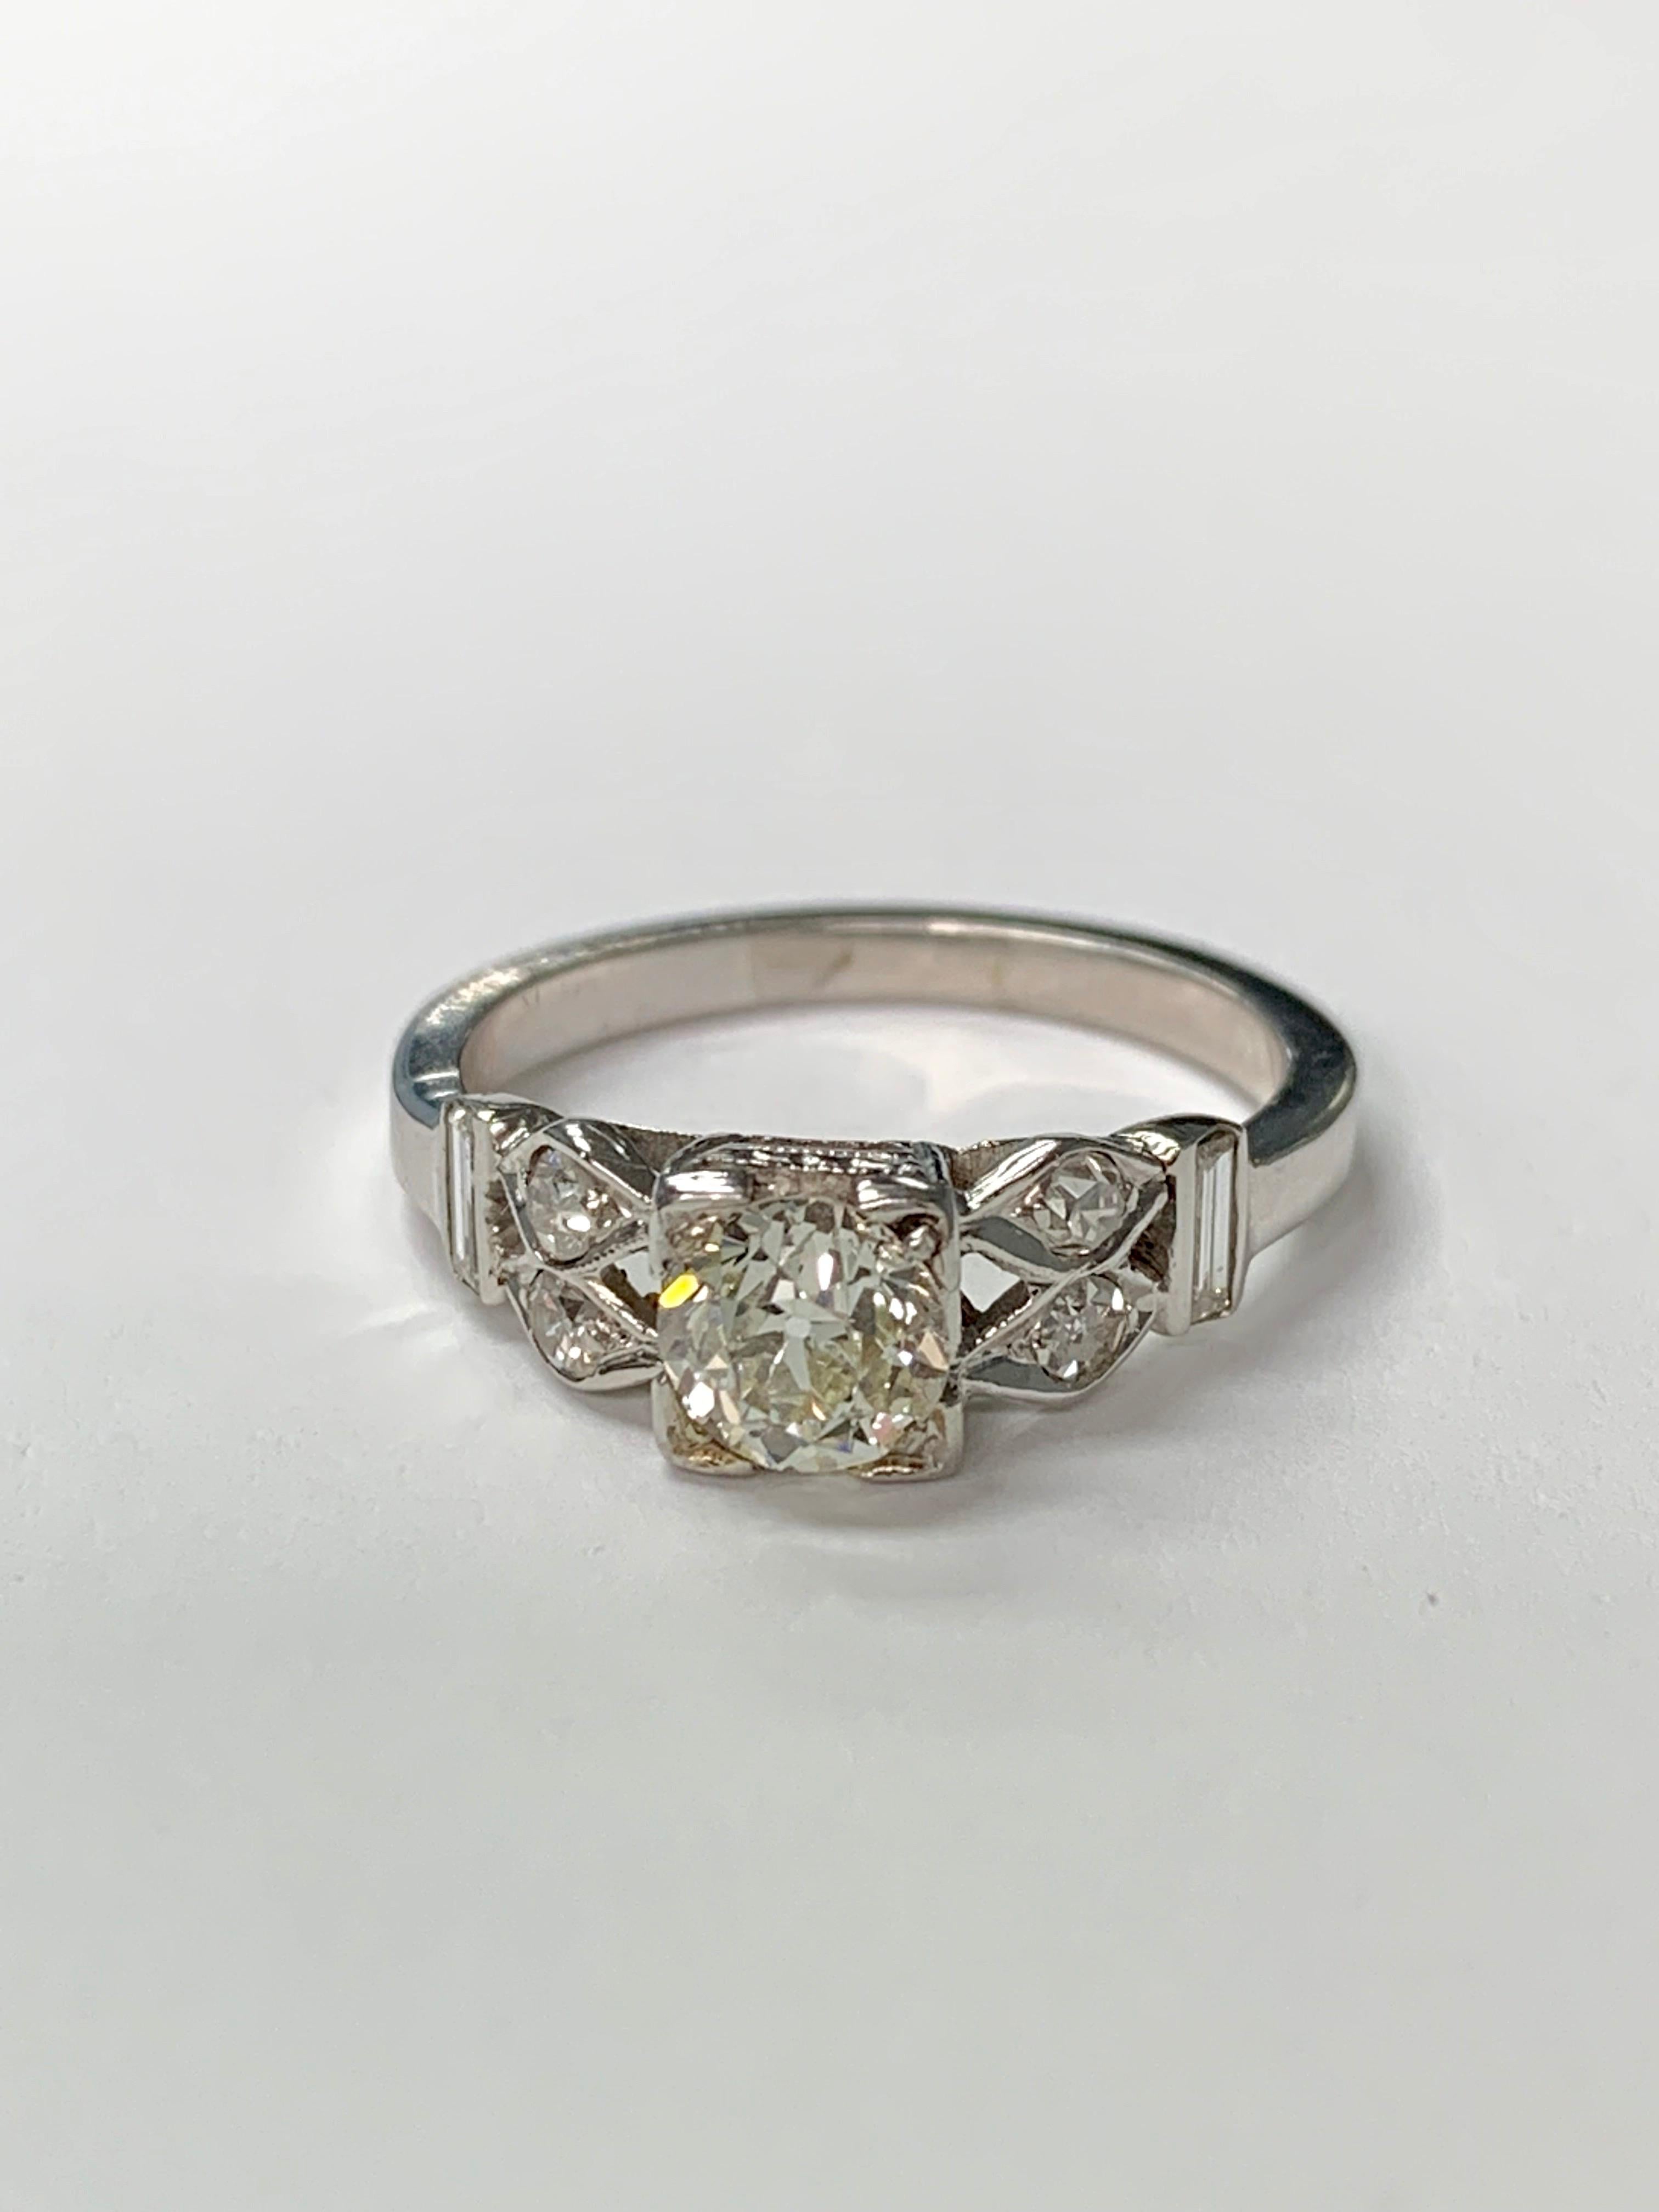 Very pretty 1930 old cut diamond engagement ring handcrafted in 118k white gold. 
The details are as follows : 
Diamond weight : 1.35 carat ( I J color VS2 clarity ) 
Metal : 18 karat white gold 
